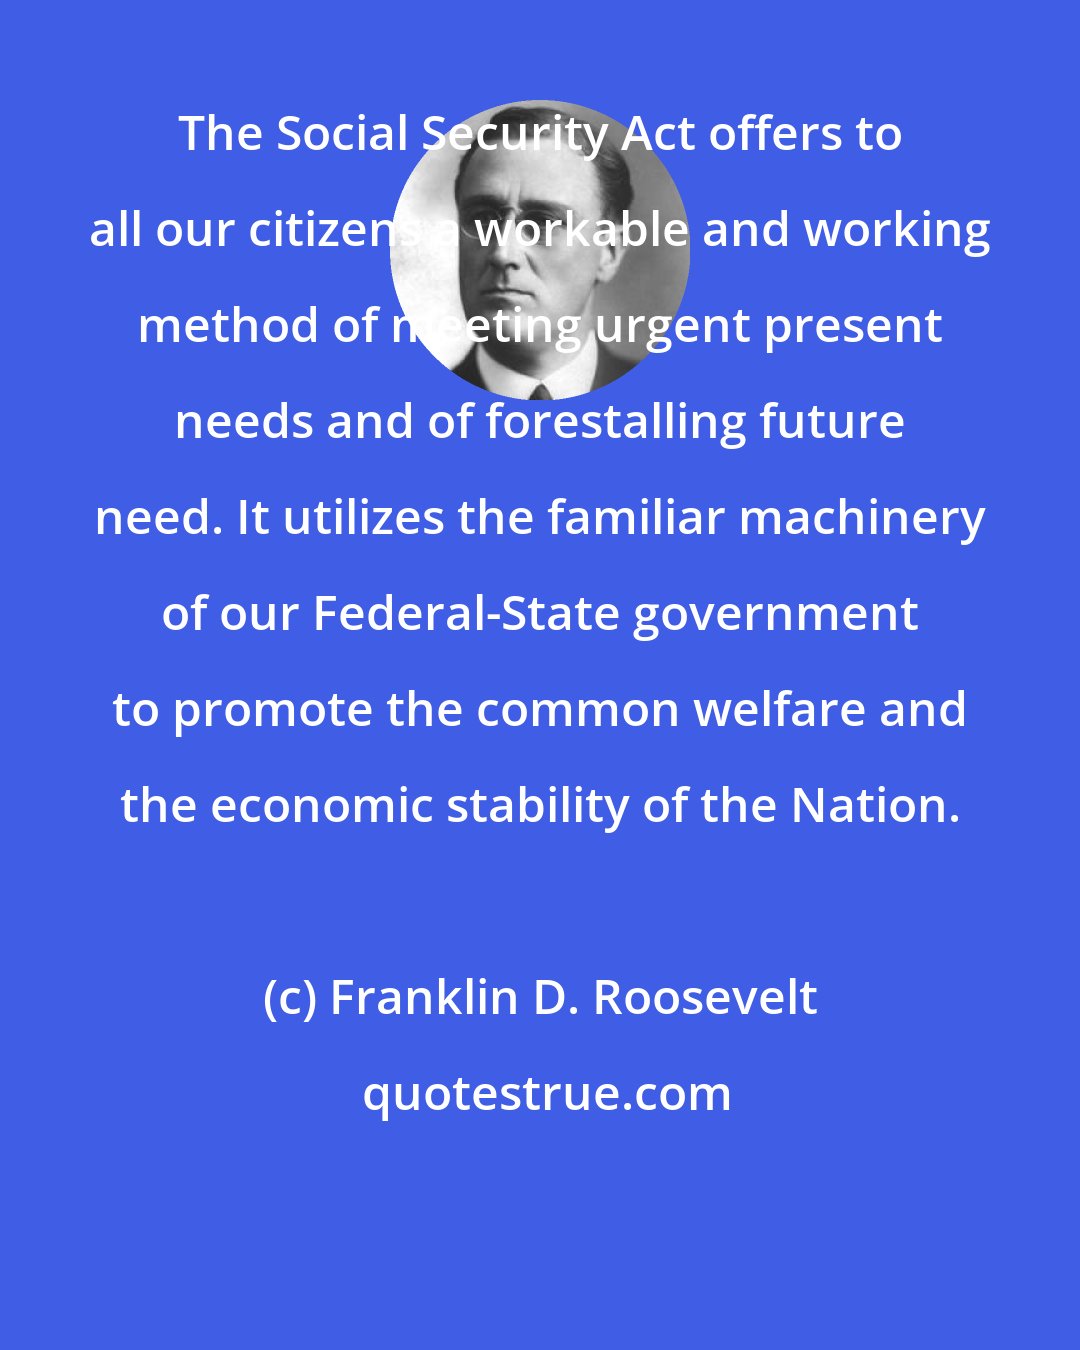 Franklin D. Roosevelt: The Social Security Act offers to all our citizens a workable and working method of meeting urgent present needs and of forestalling future need. It utilizes the familiar machinery of our Federal-State government to promote the common welfare and the economic stability of the Nation.